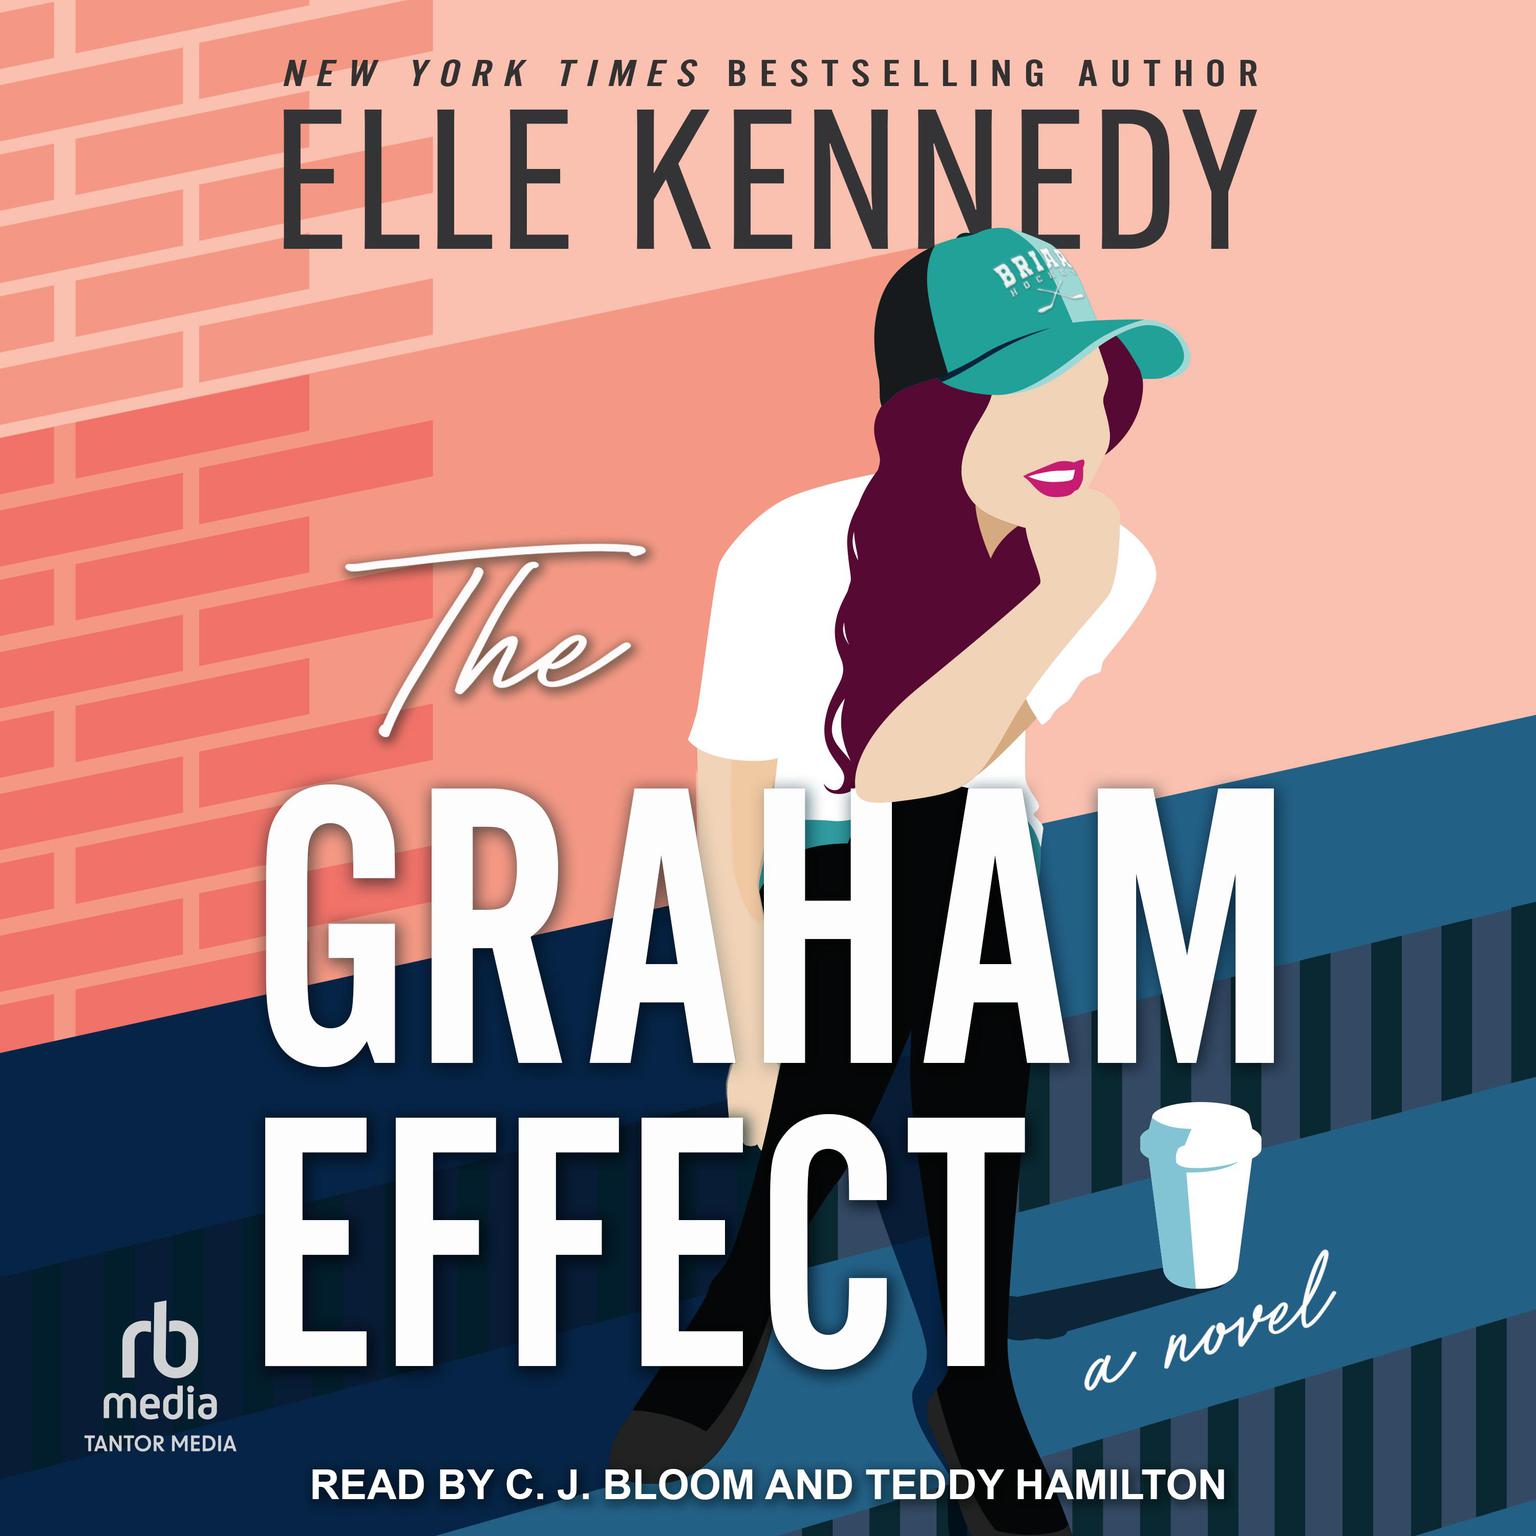 The Graham Effect Audiobook, by Elle Kennedy